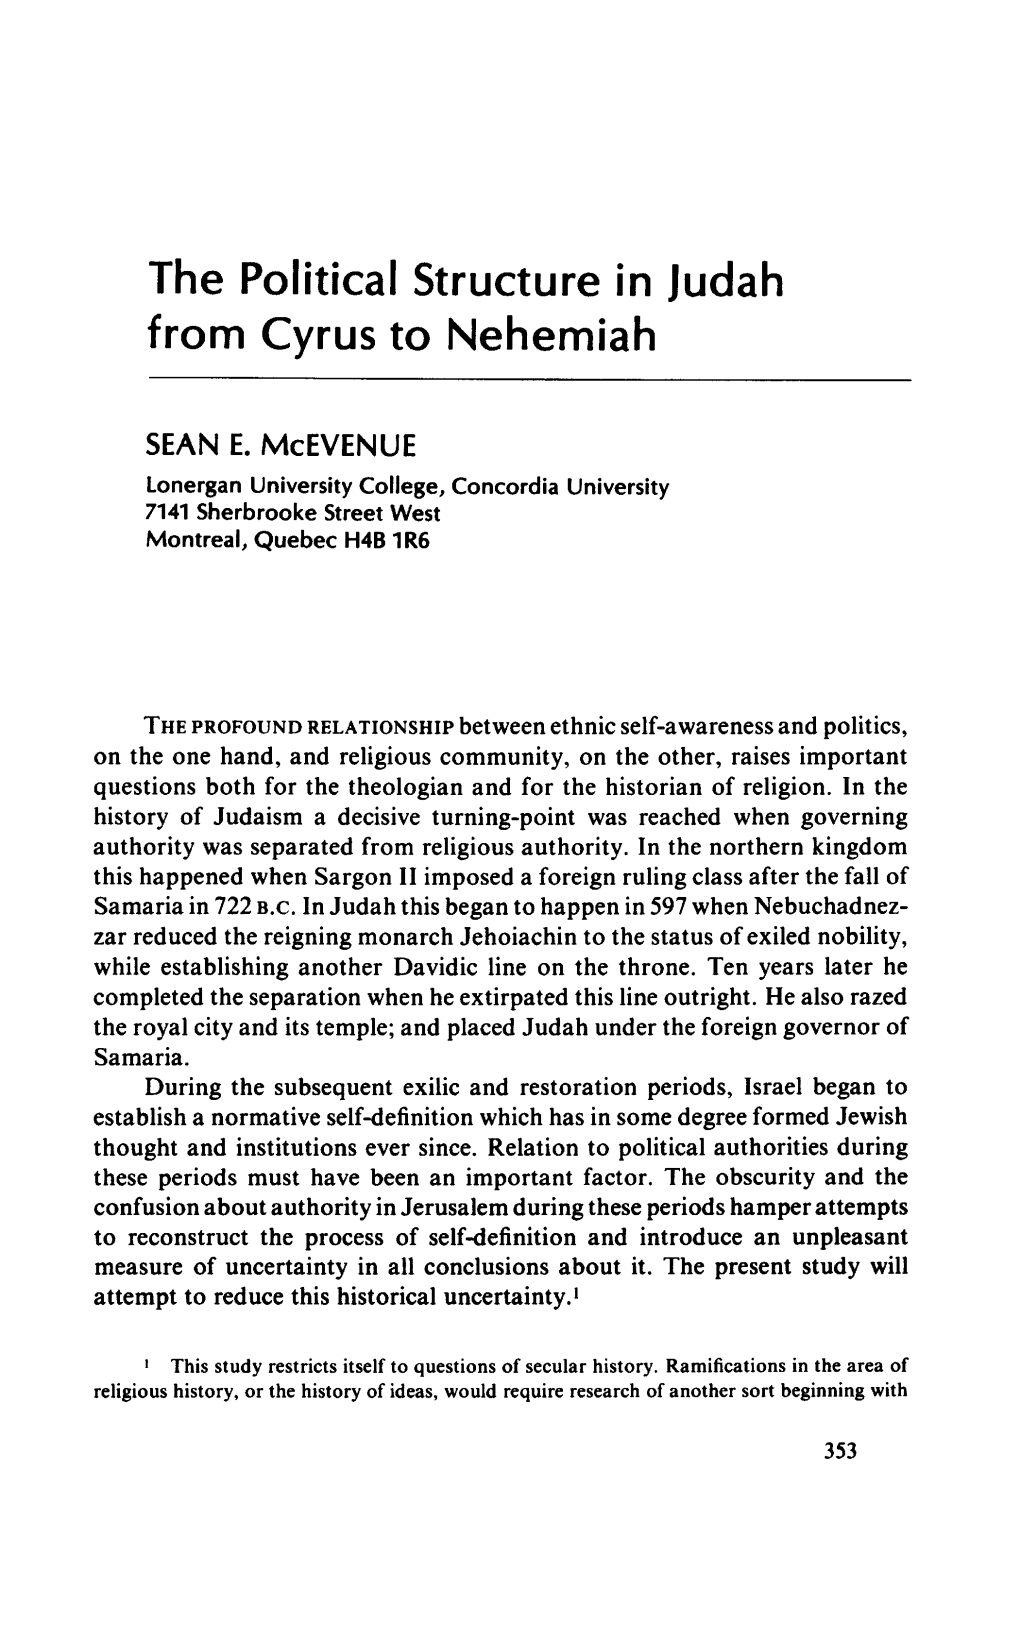 The Political Structure in Judah from Cyrus to Nehemiah